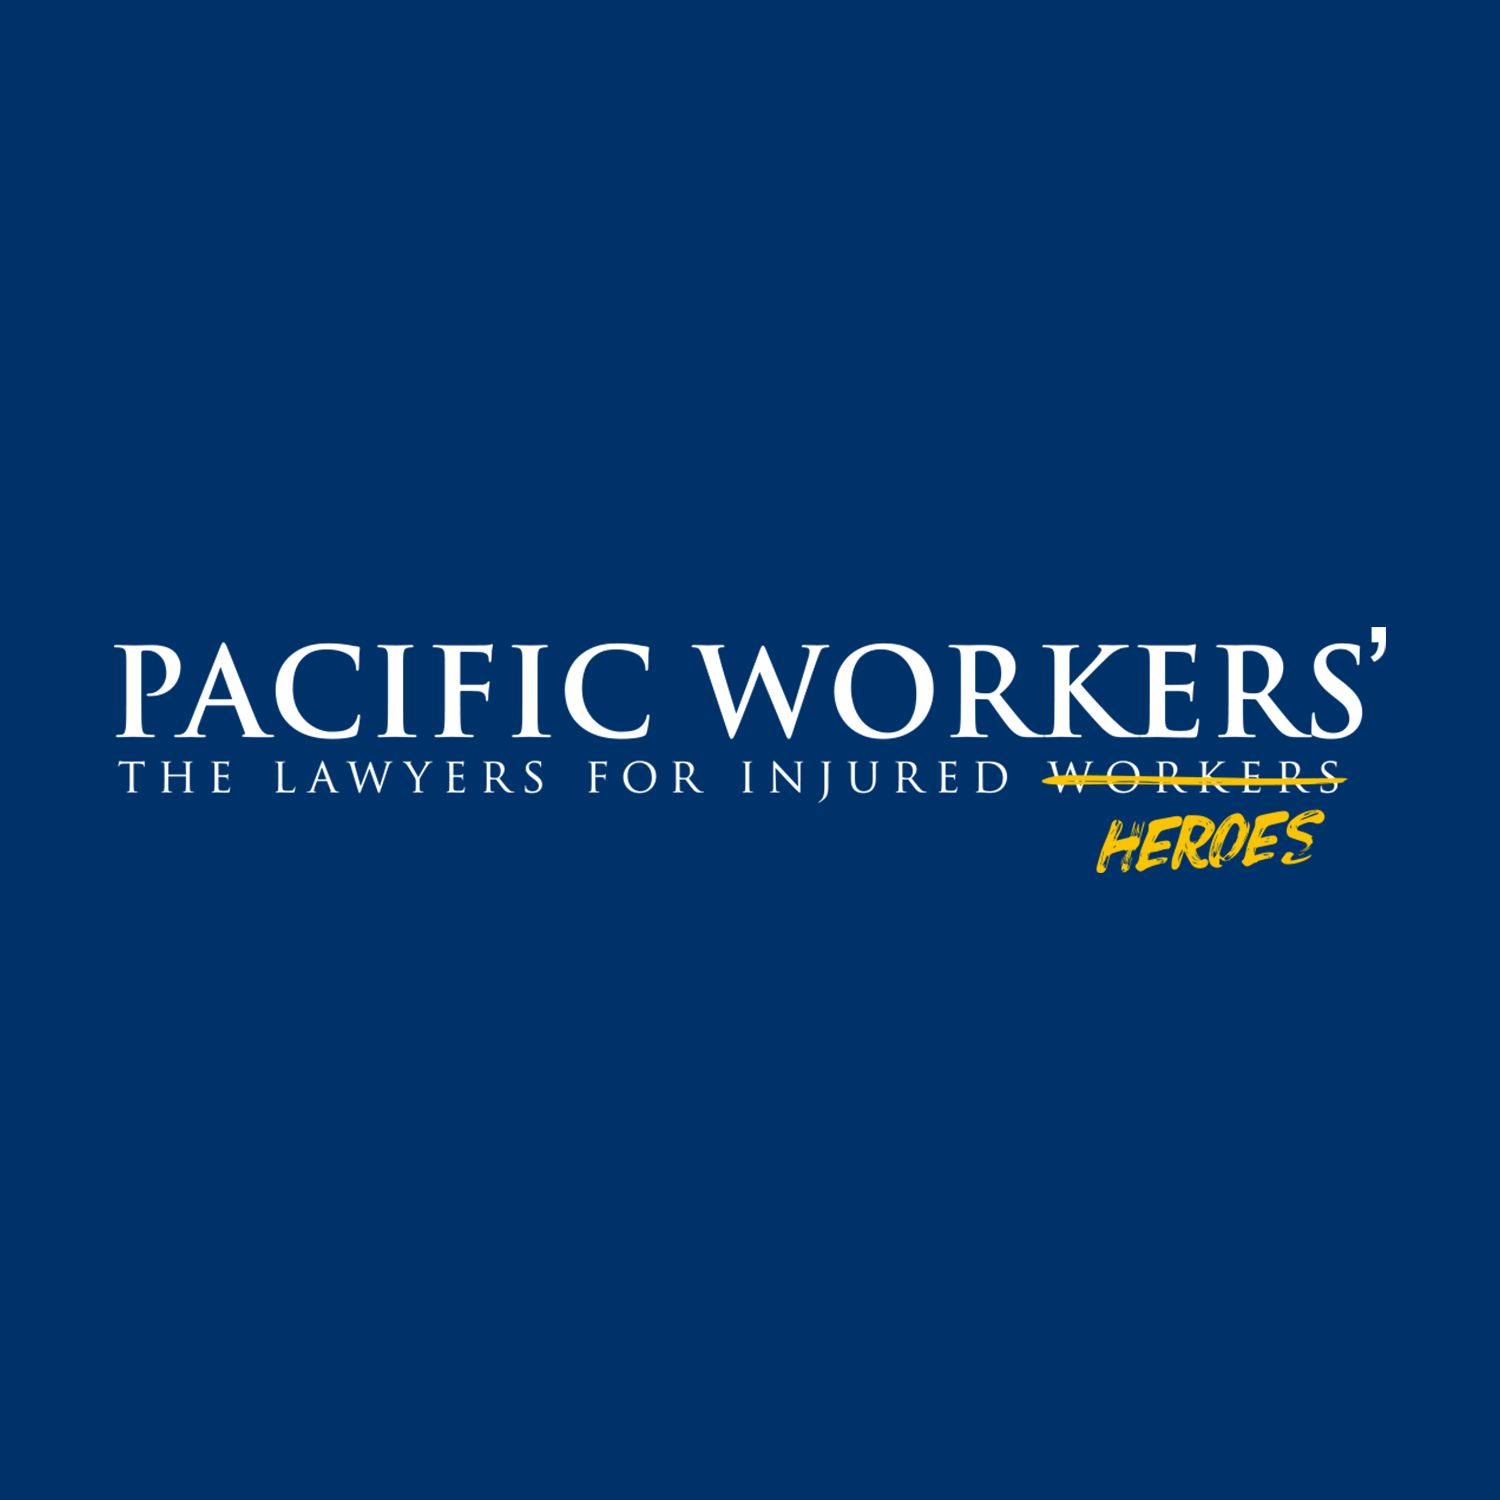 Pacific Workers', The Lawyers for Injured Workers - Oakland, CA 94621 - (510)444-2512 | ShowMeLocal.com